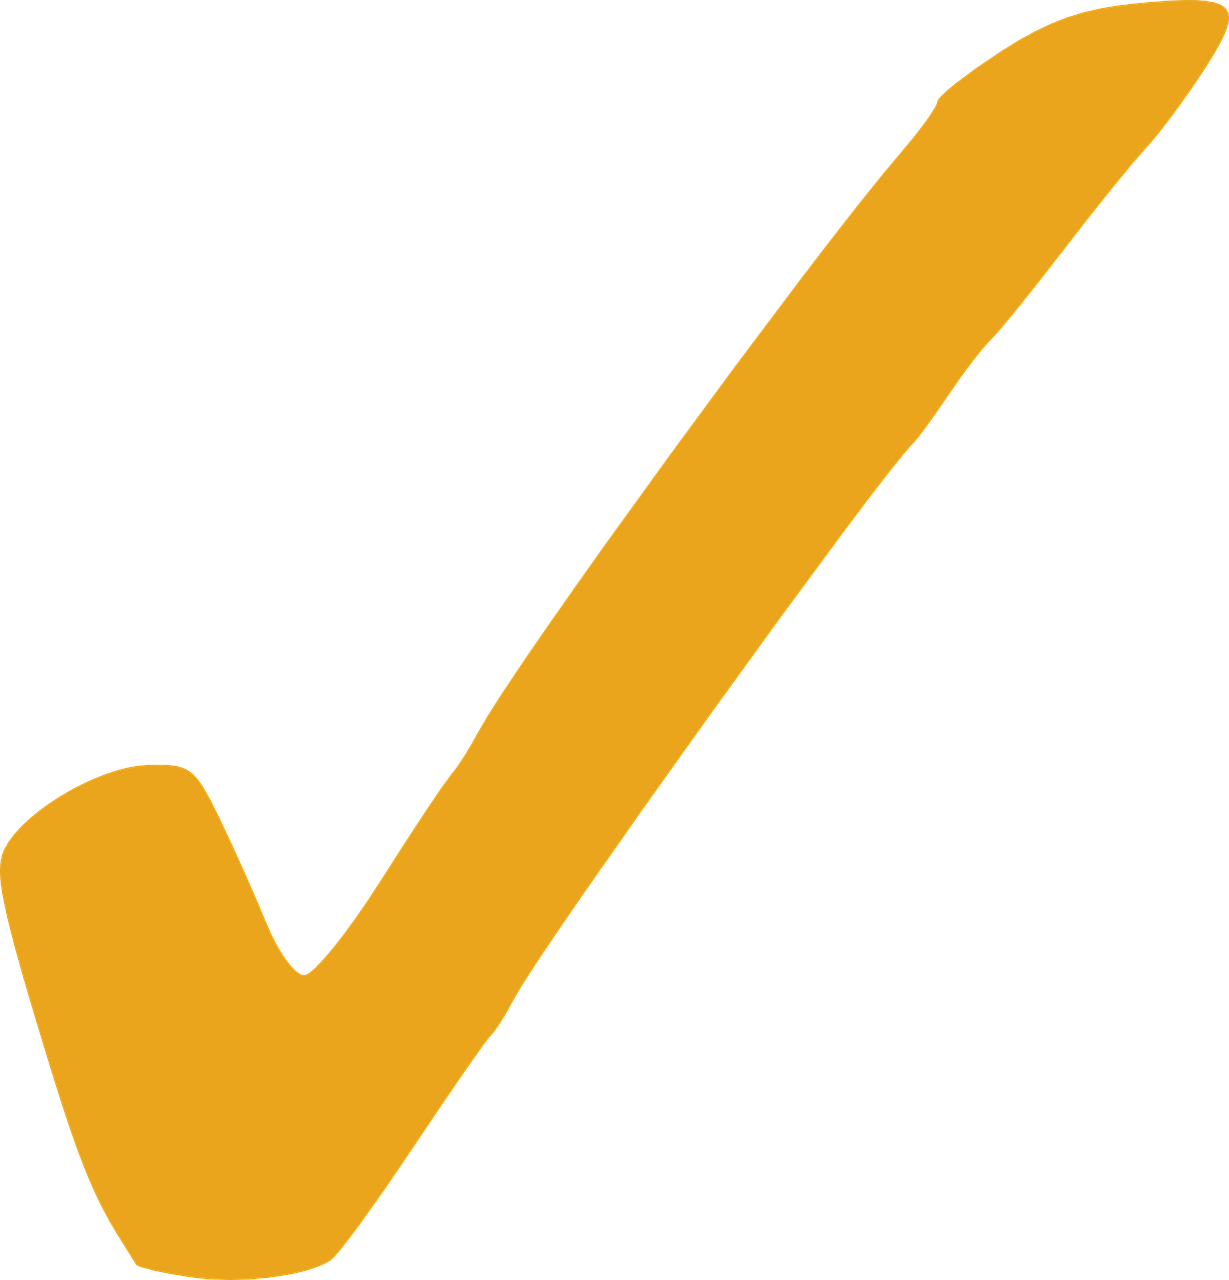 Image of check mark next to accountability
